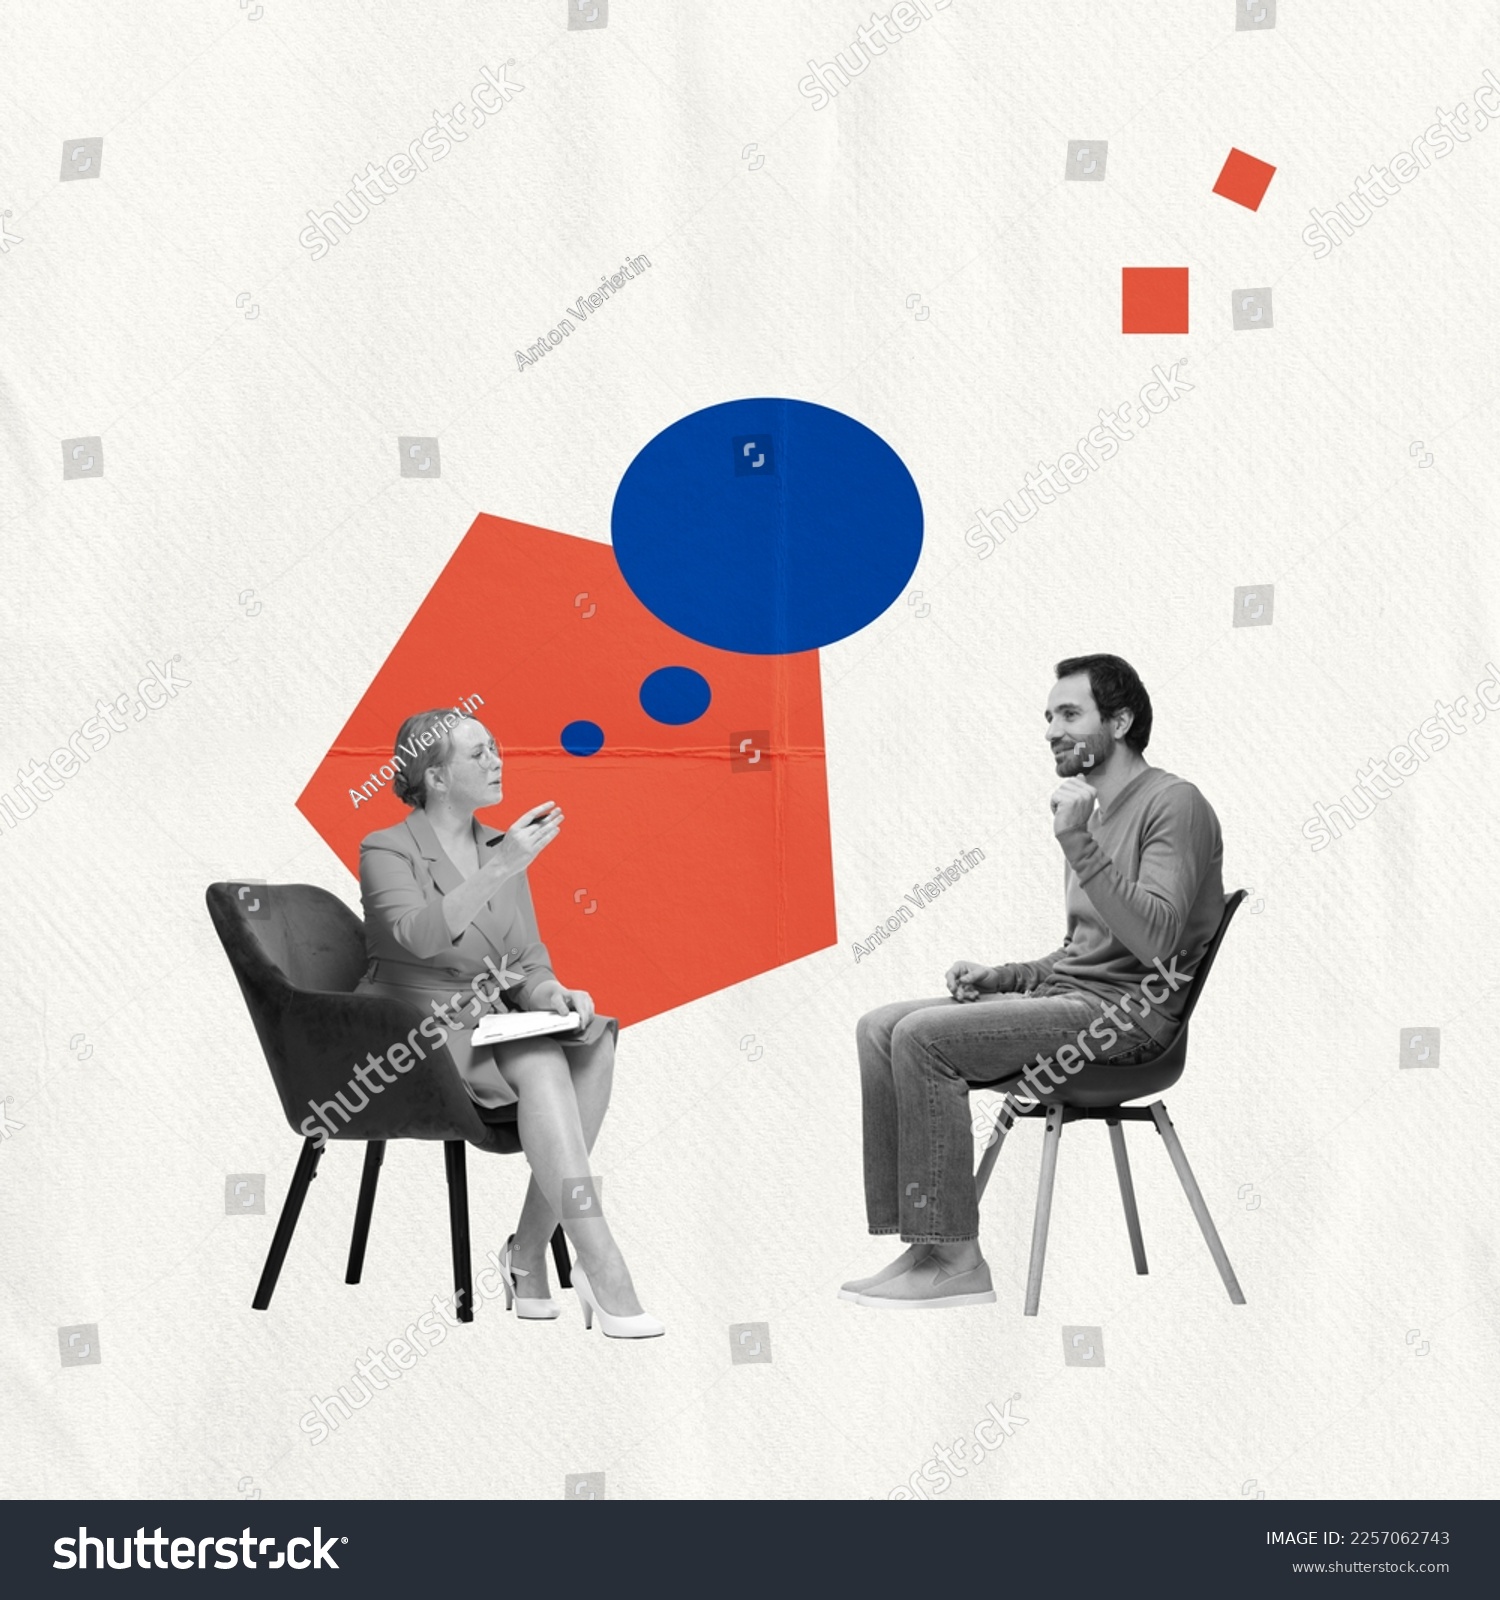 Support, care. Contemporary art collage about young man meeting with professional psychologist. Concept of modern millennial lifestyle, mental health, psychological help #2257062743